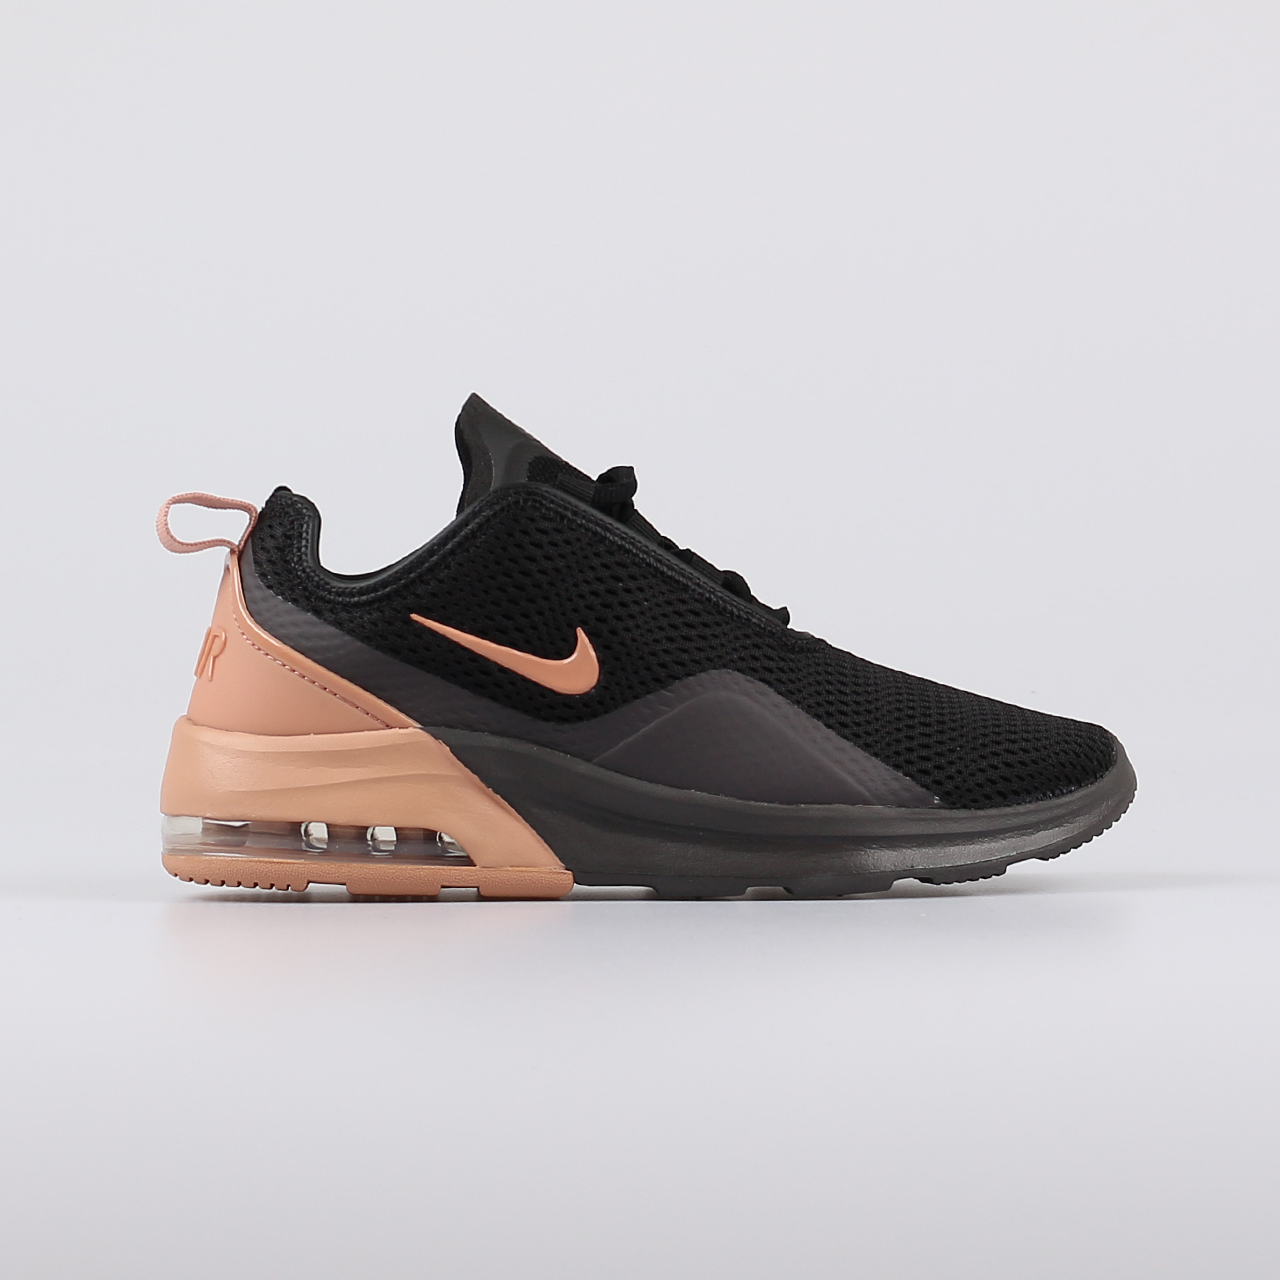 profundo Accidental descuento Nike Sneakers Dames Clearance, GET 52% OFF, sportsregras.com